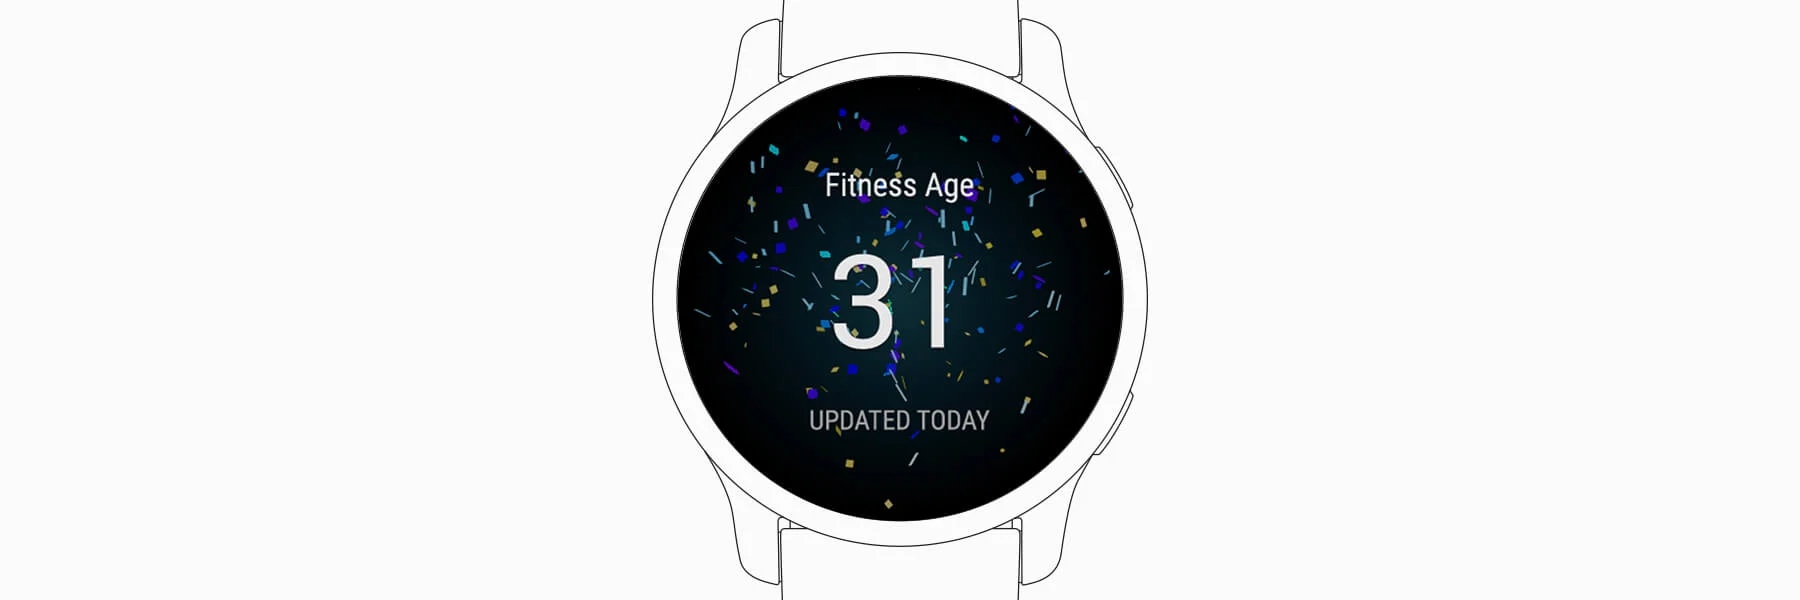 Fitness Age